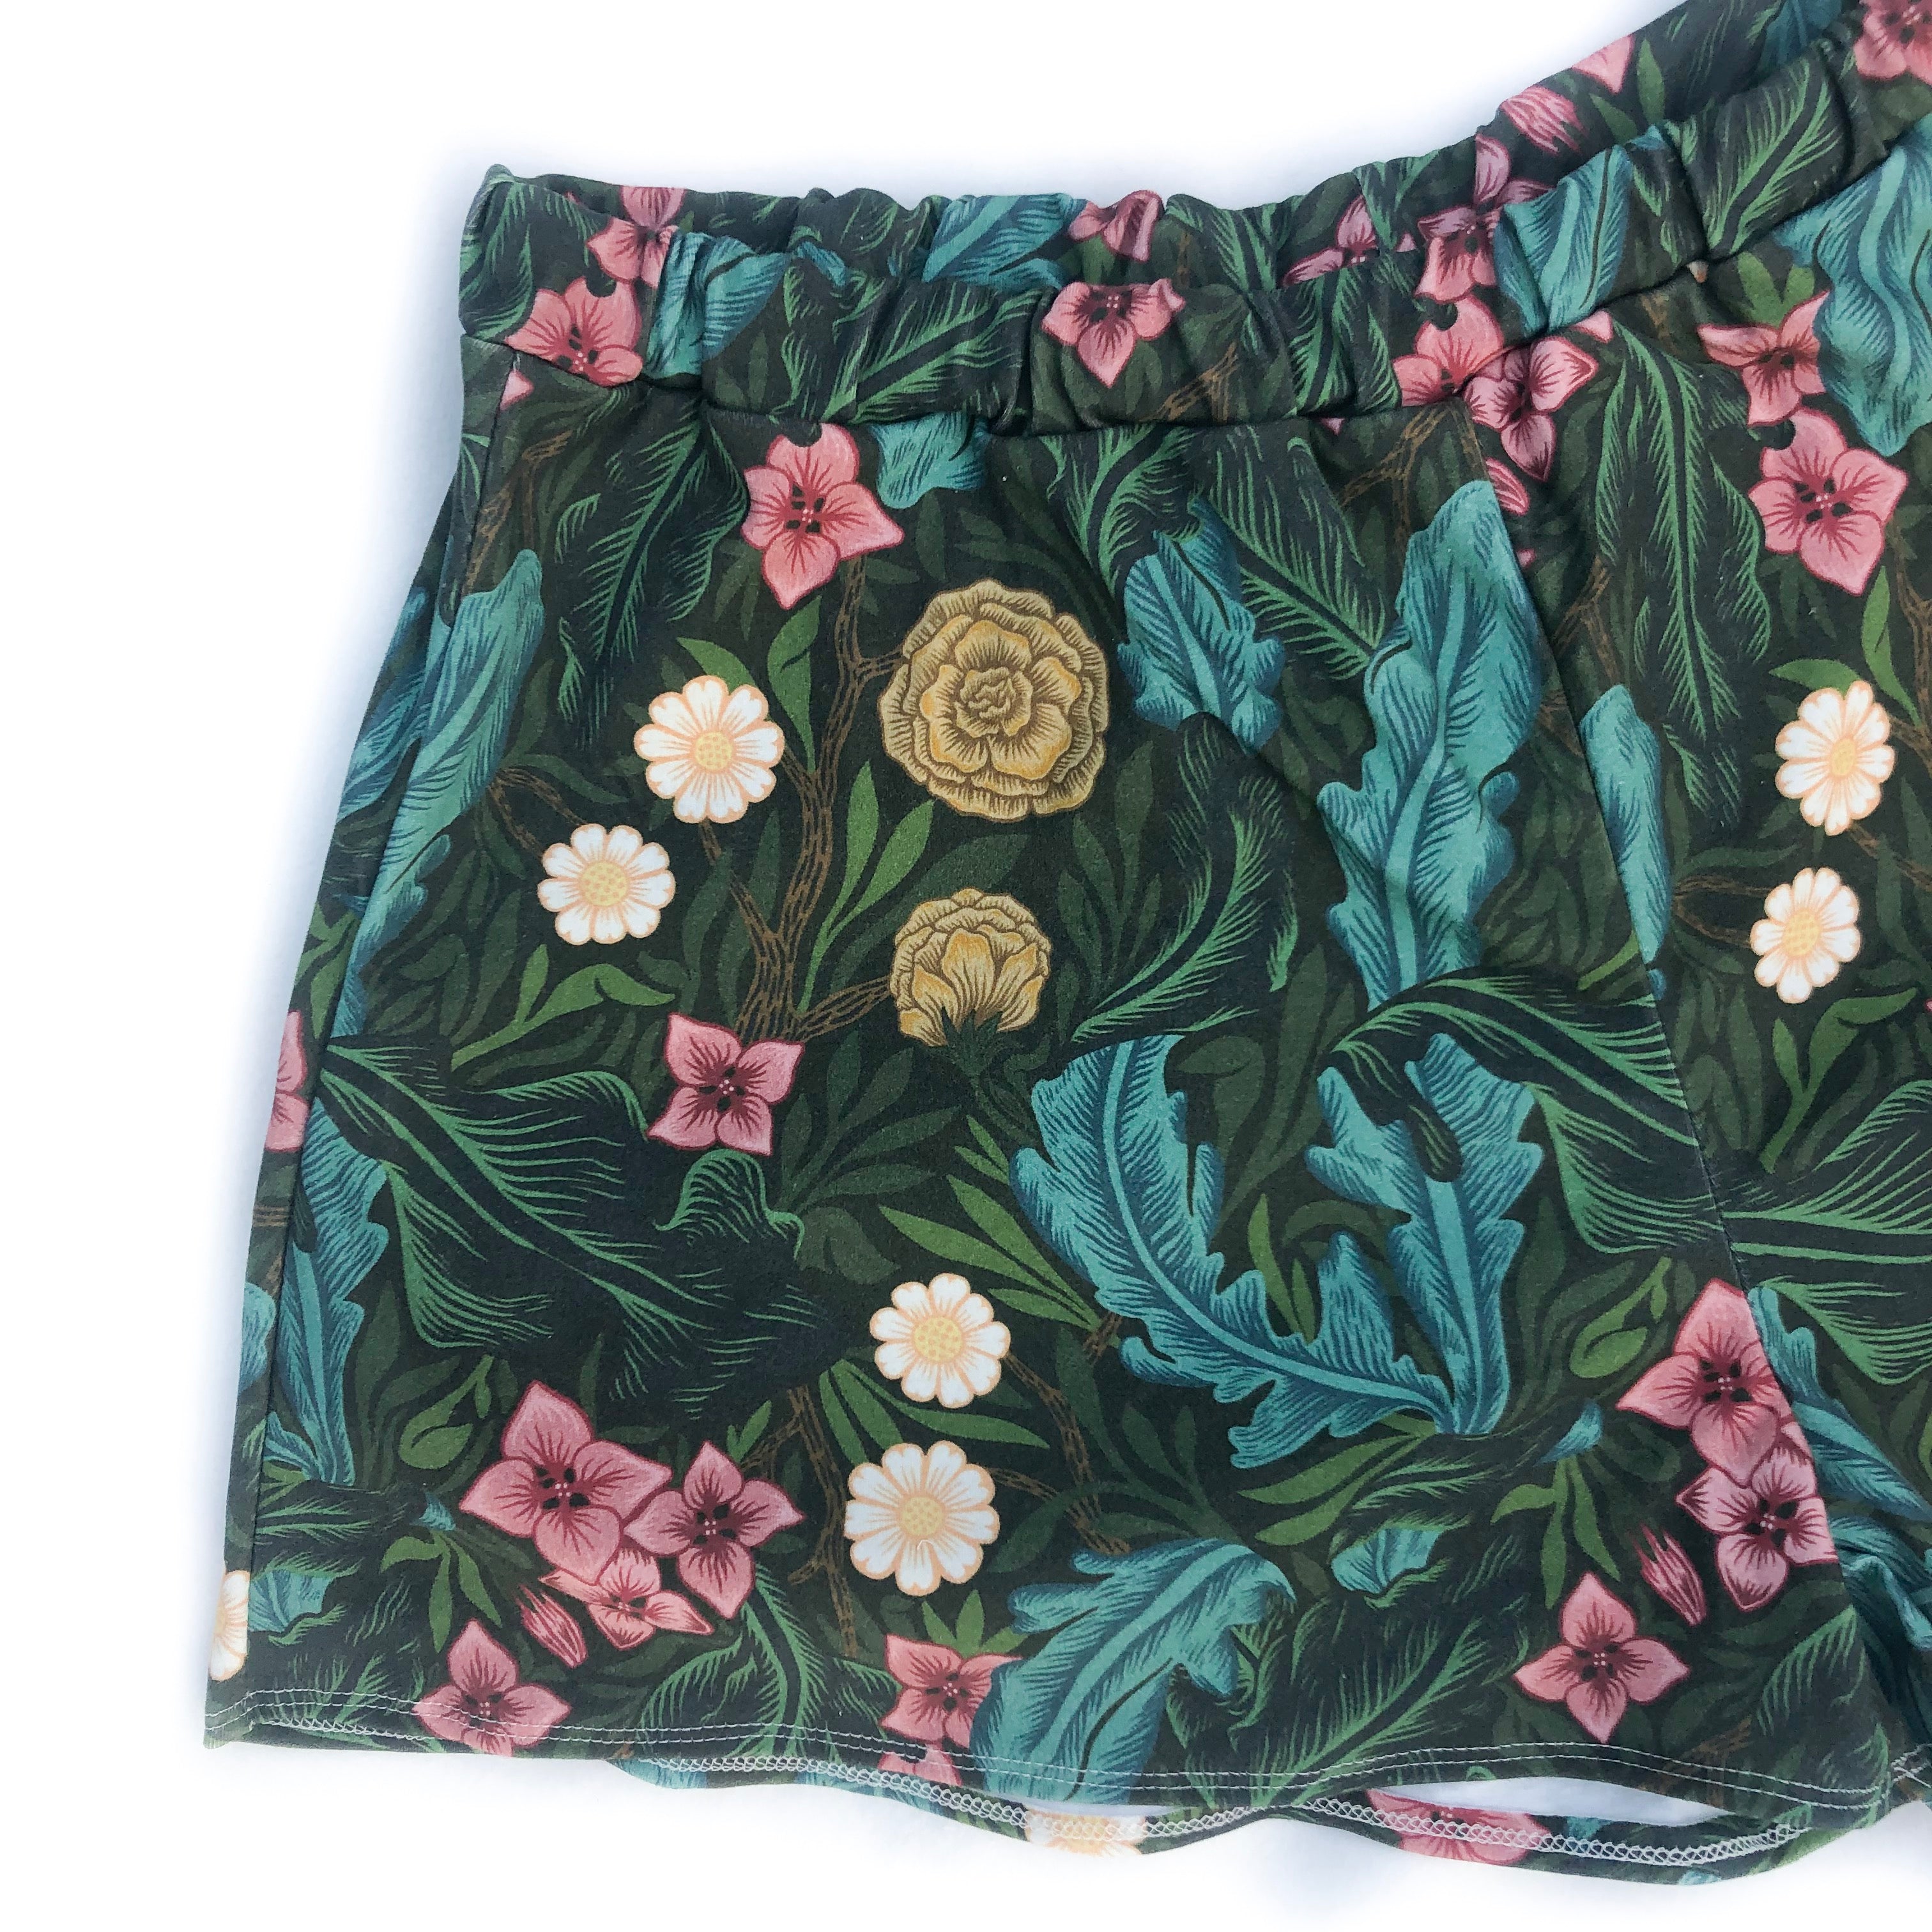 Women’s Vintage Floral High-waisted Shorts